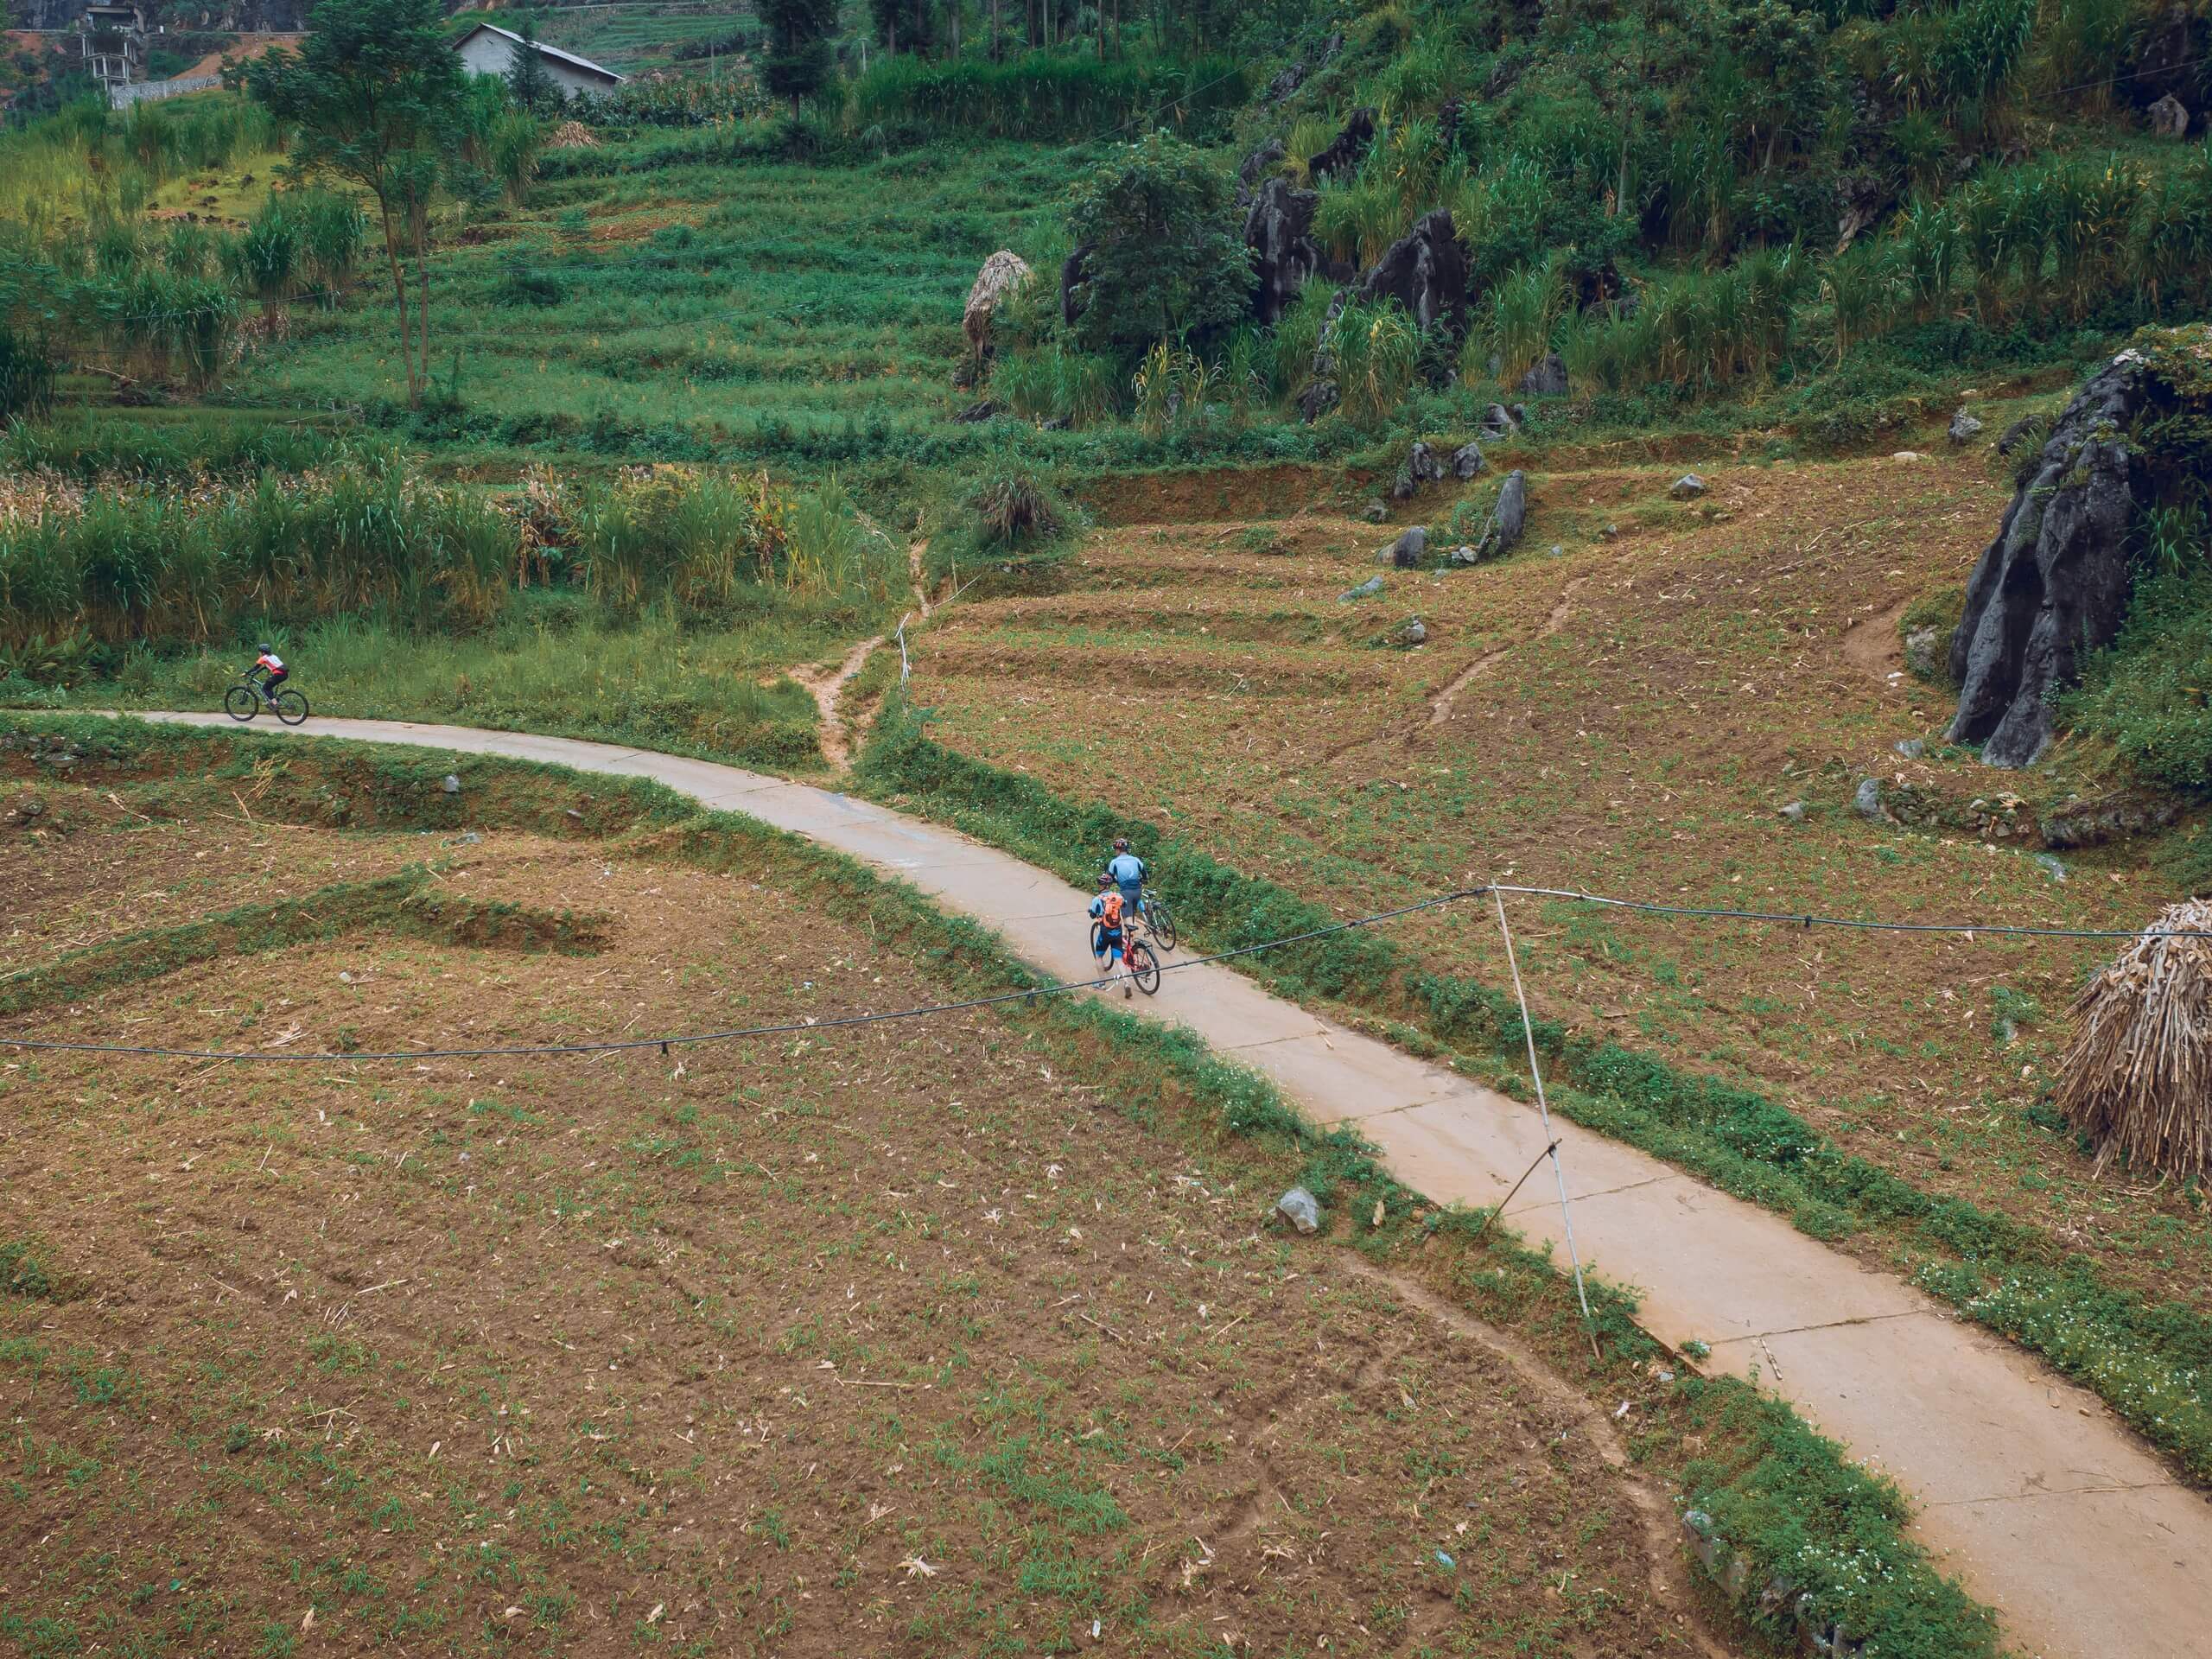 Cyclists riding the road in Northern Vietnam